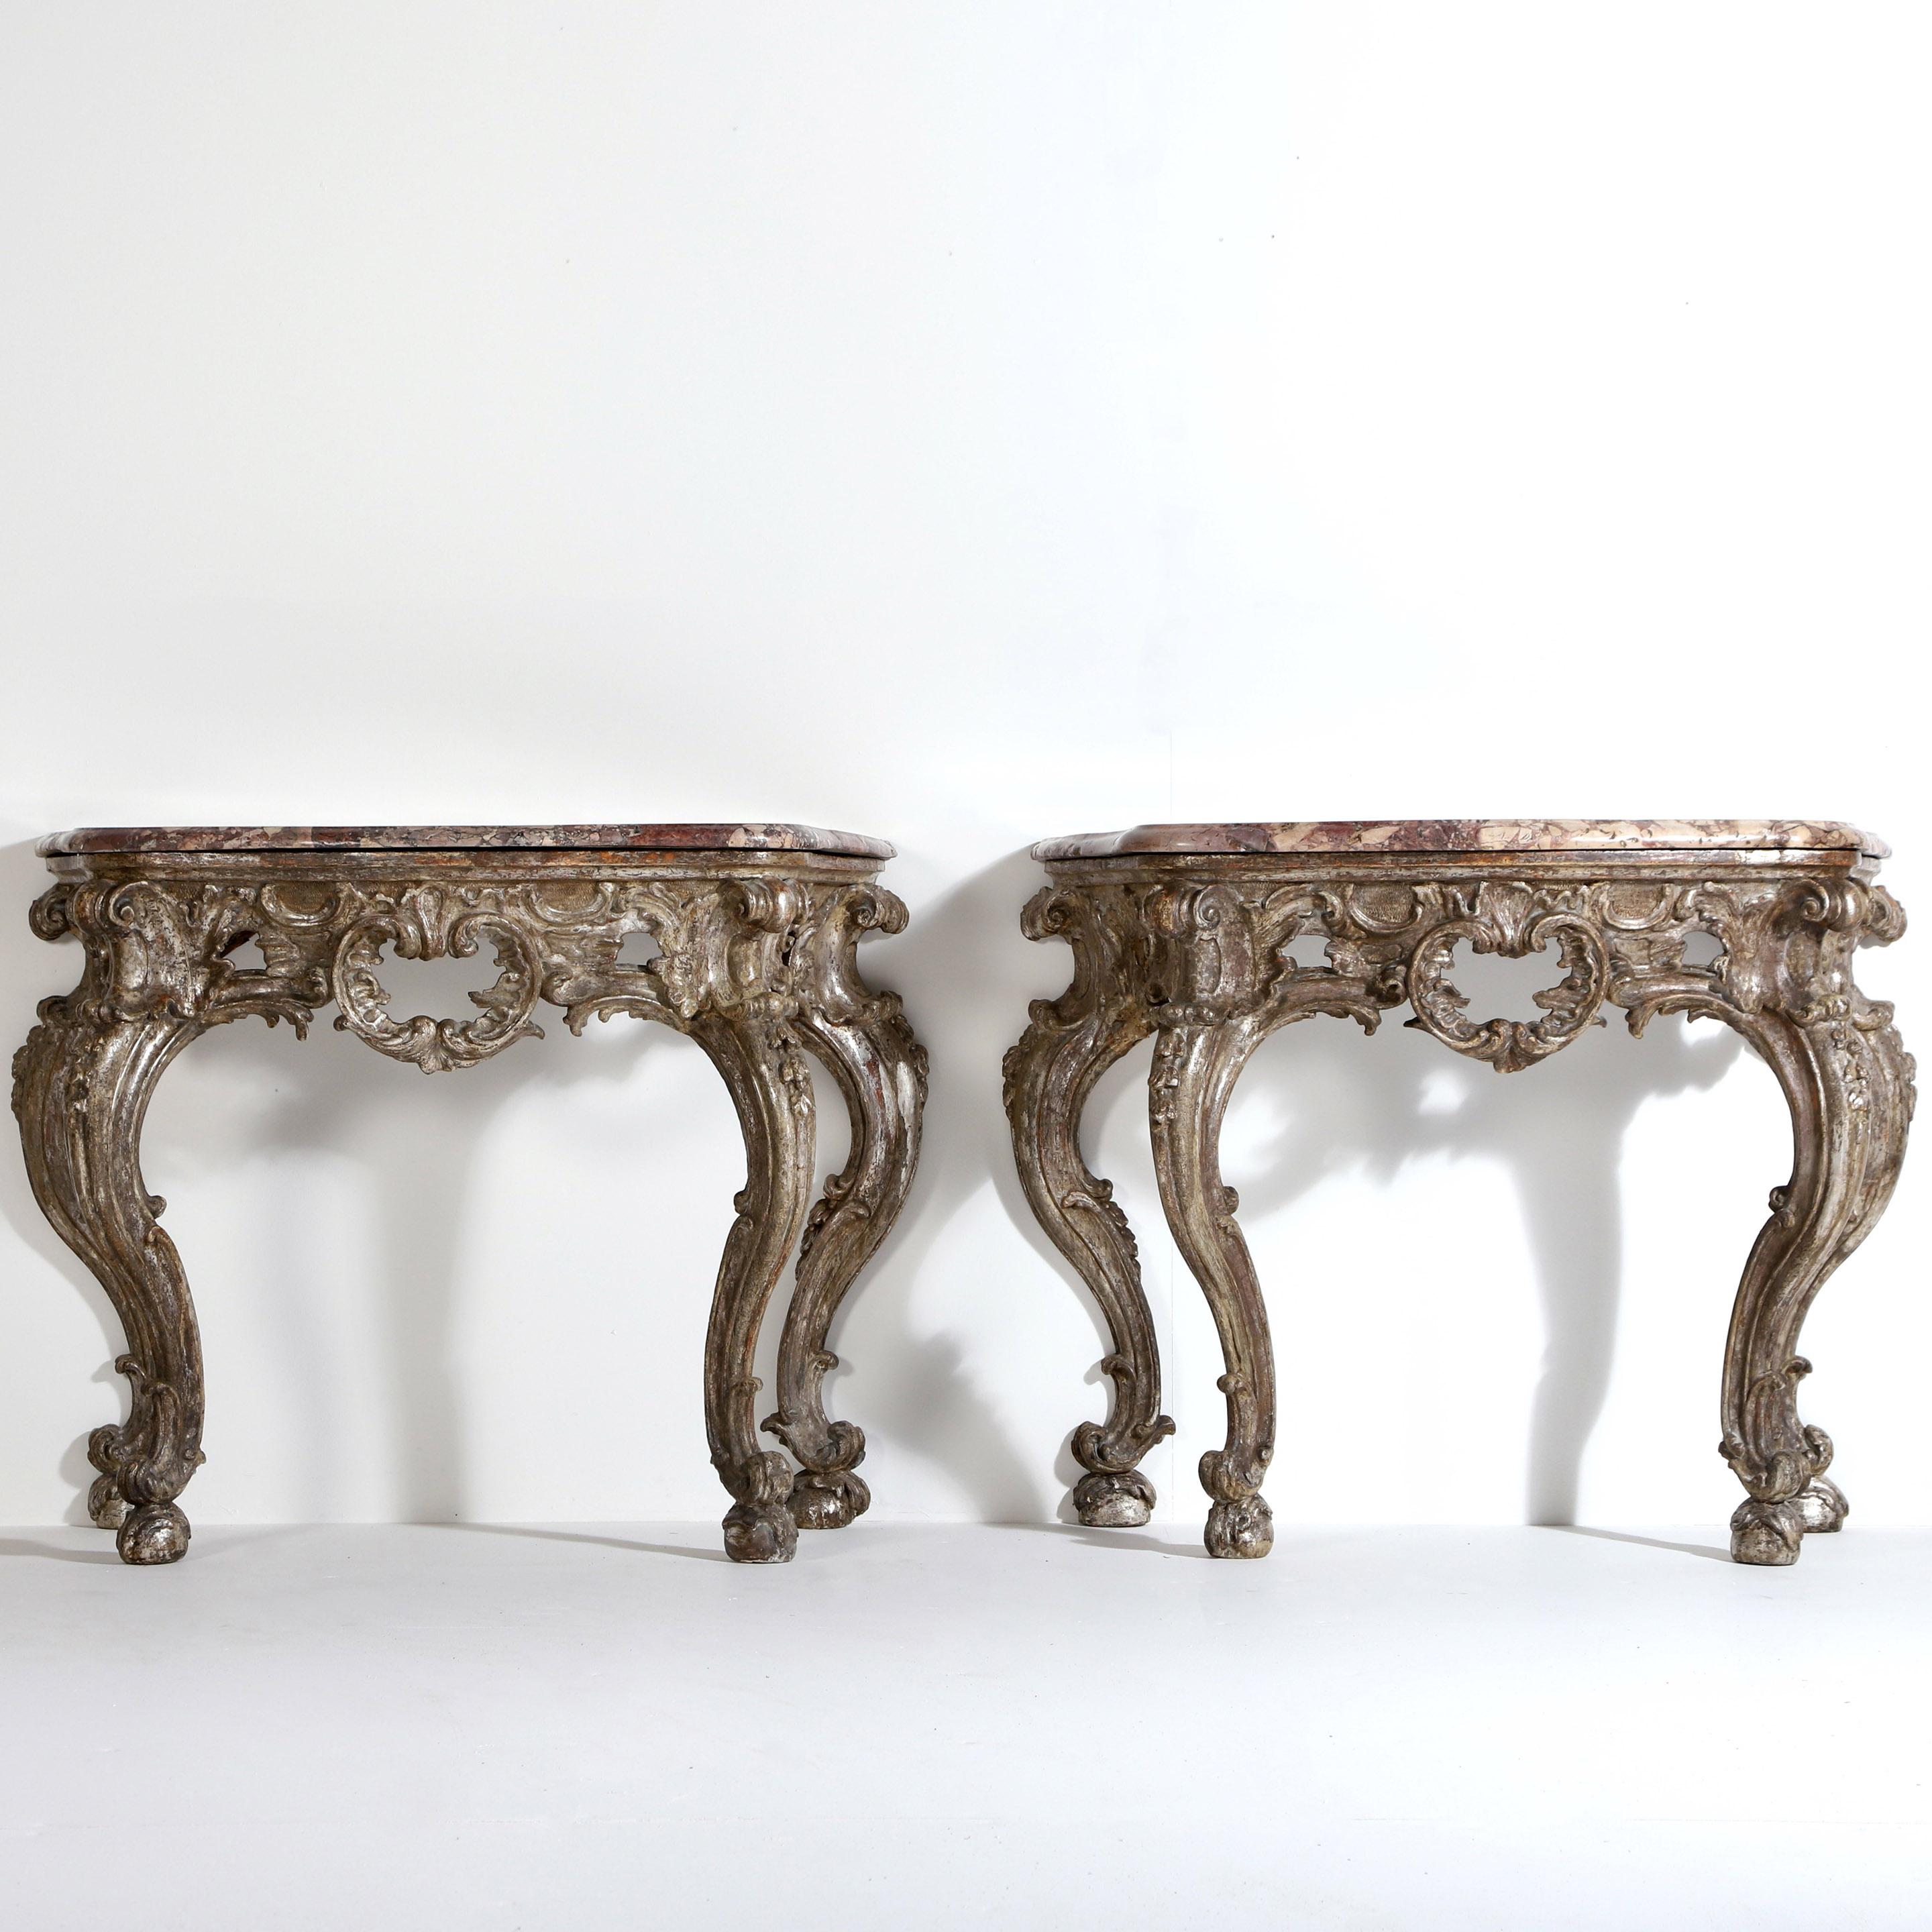 A striking pair of Italian Baroque 18th century console tables in their original silver gilded finish…ageing and fading beautifully to a soft yet stable distressed silver that compliments the bevelled breccia marble tops.

The marble tops